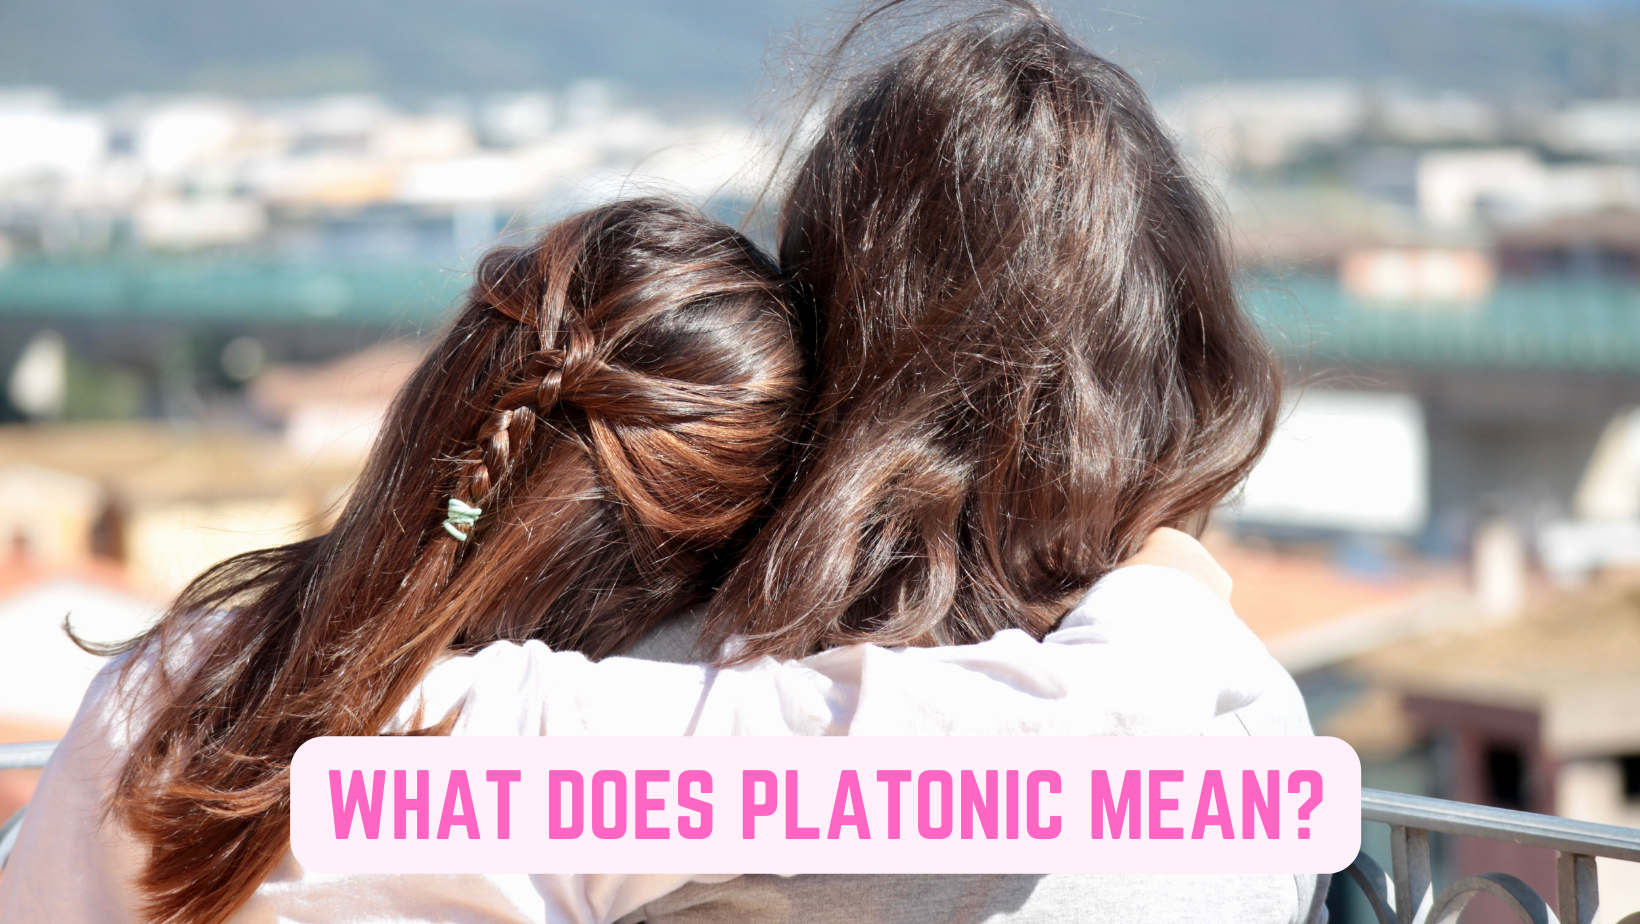 What Does Platonic Mean